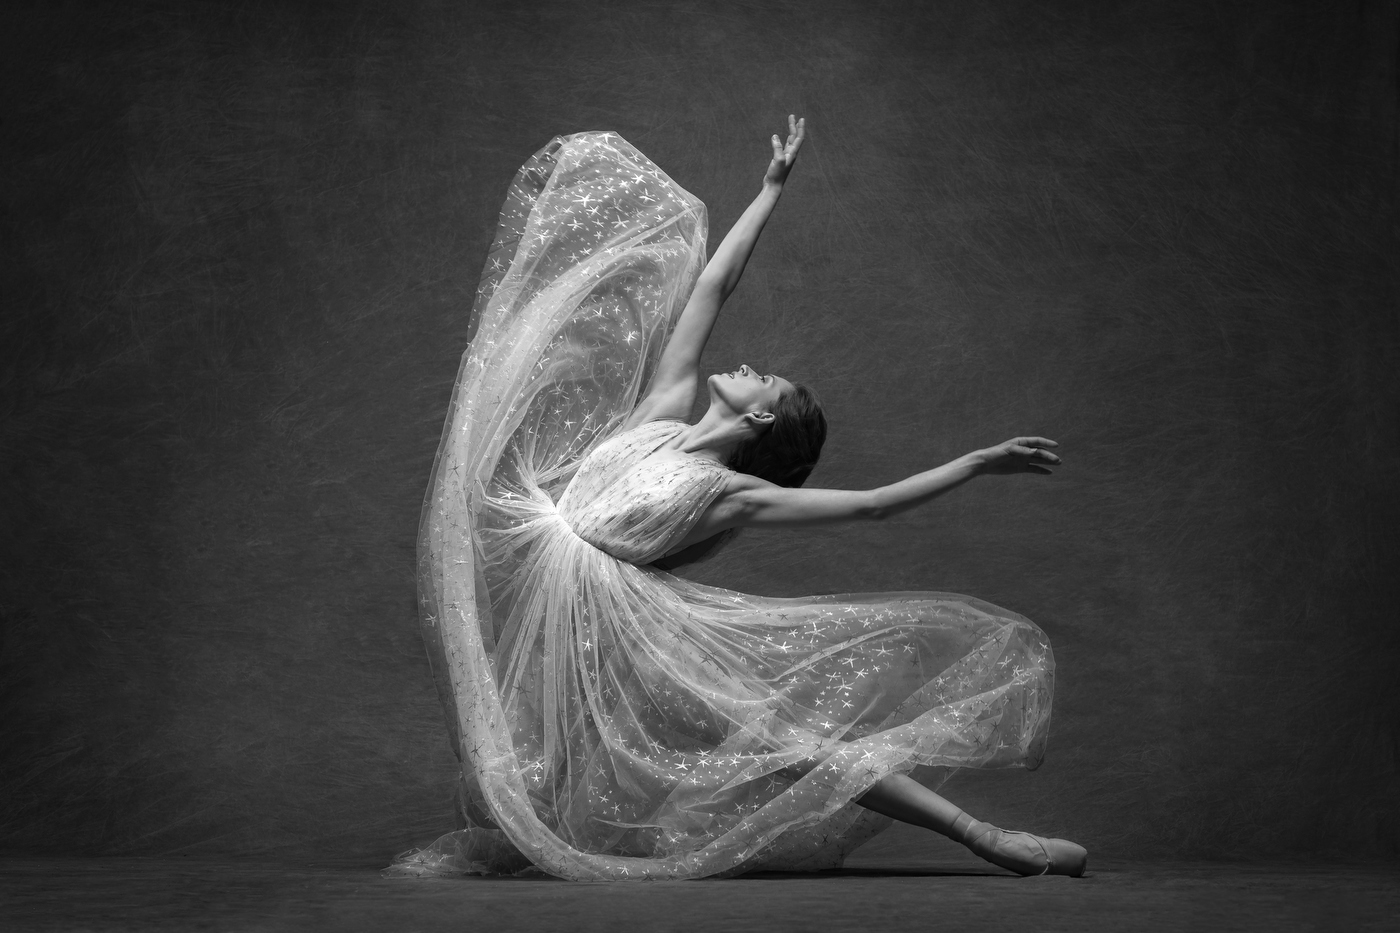 Canon U.S.A., Inc. | The Dancers: A Fine Art Ballet Project with Canon Explorer Tyler Stableford